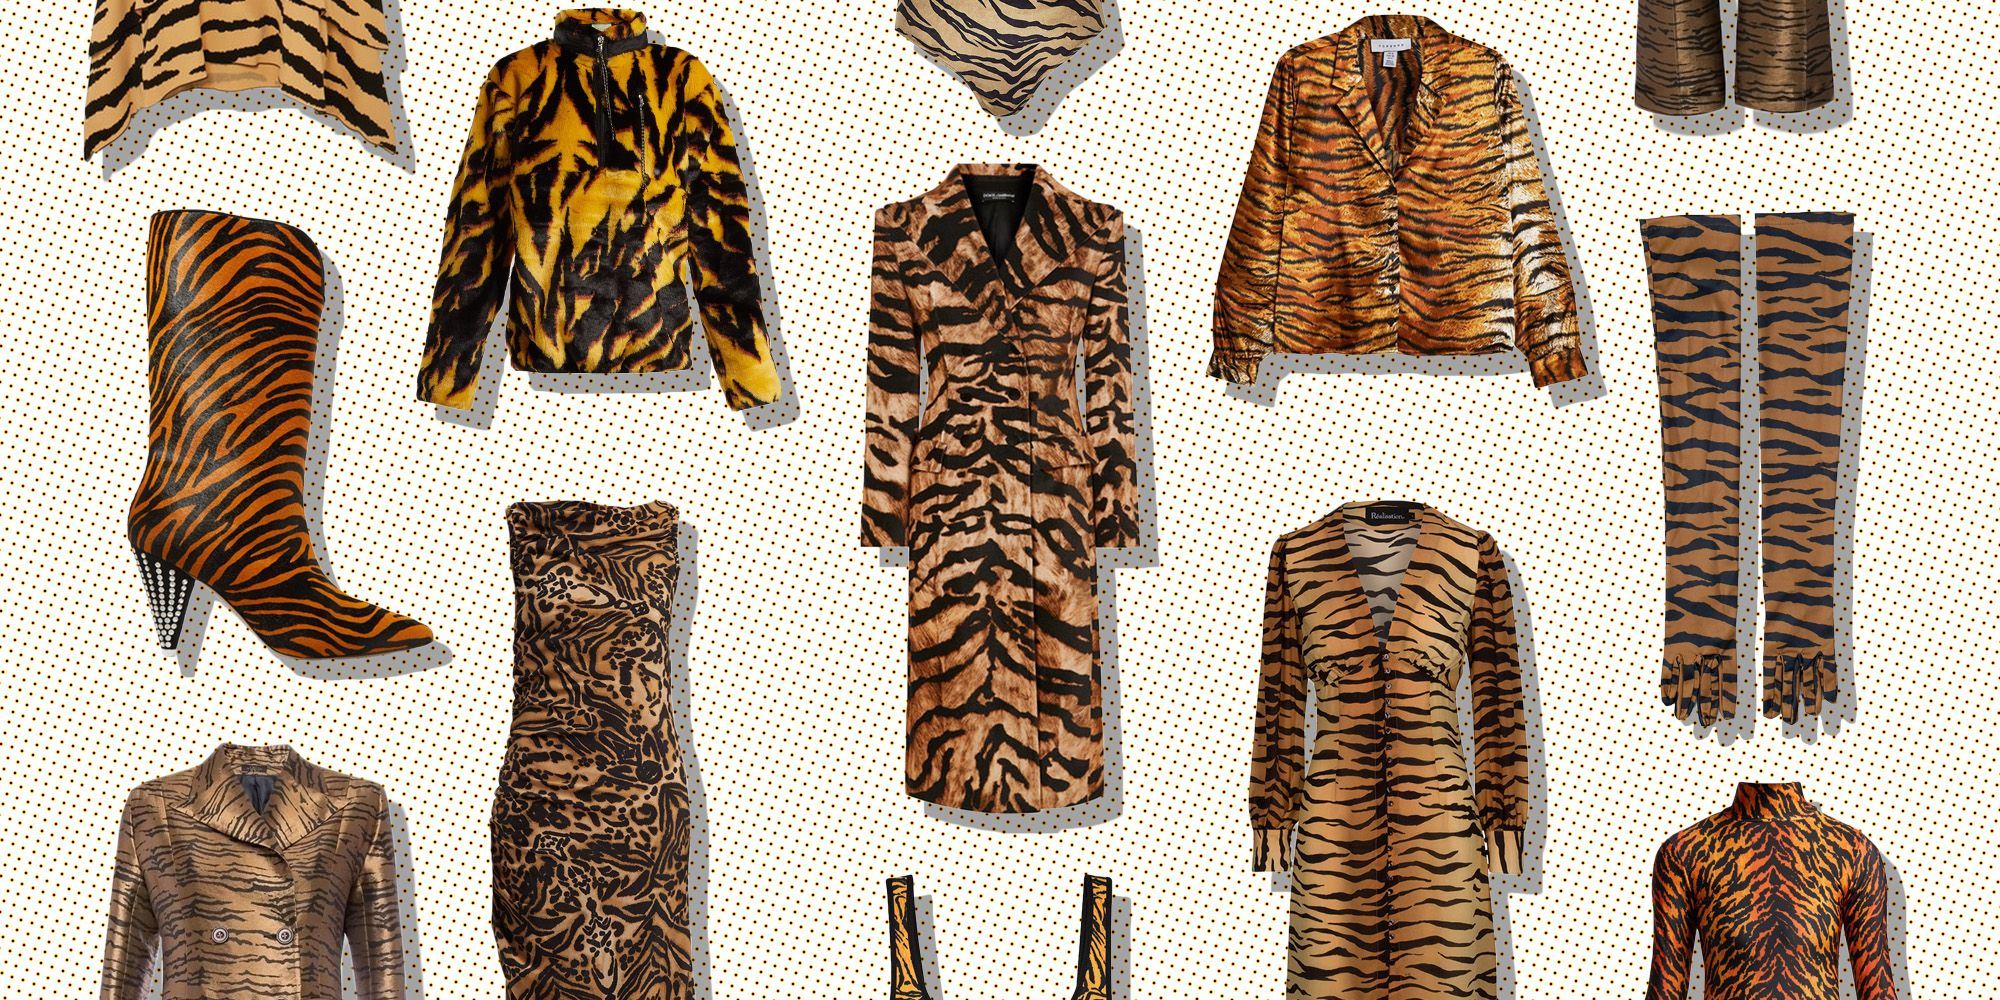 breed Tijd eer 20 Tiger Print Items To Buy Right Now